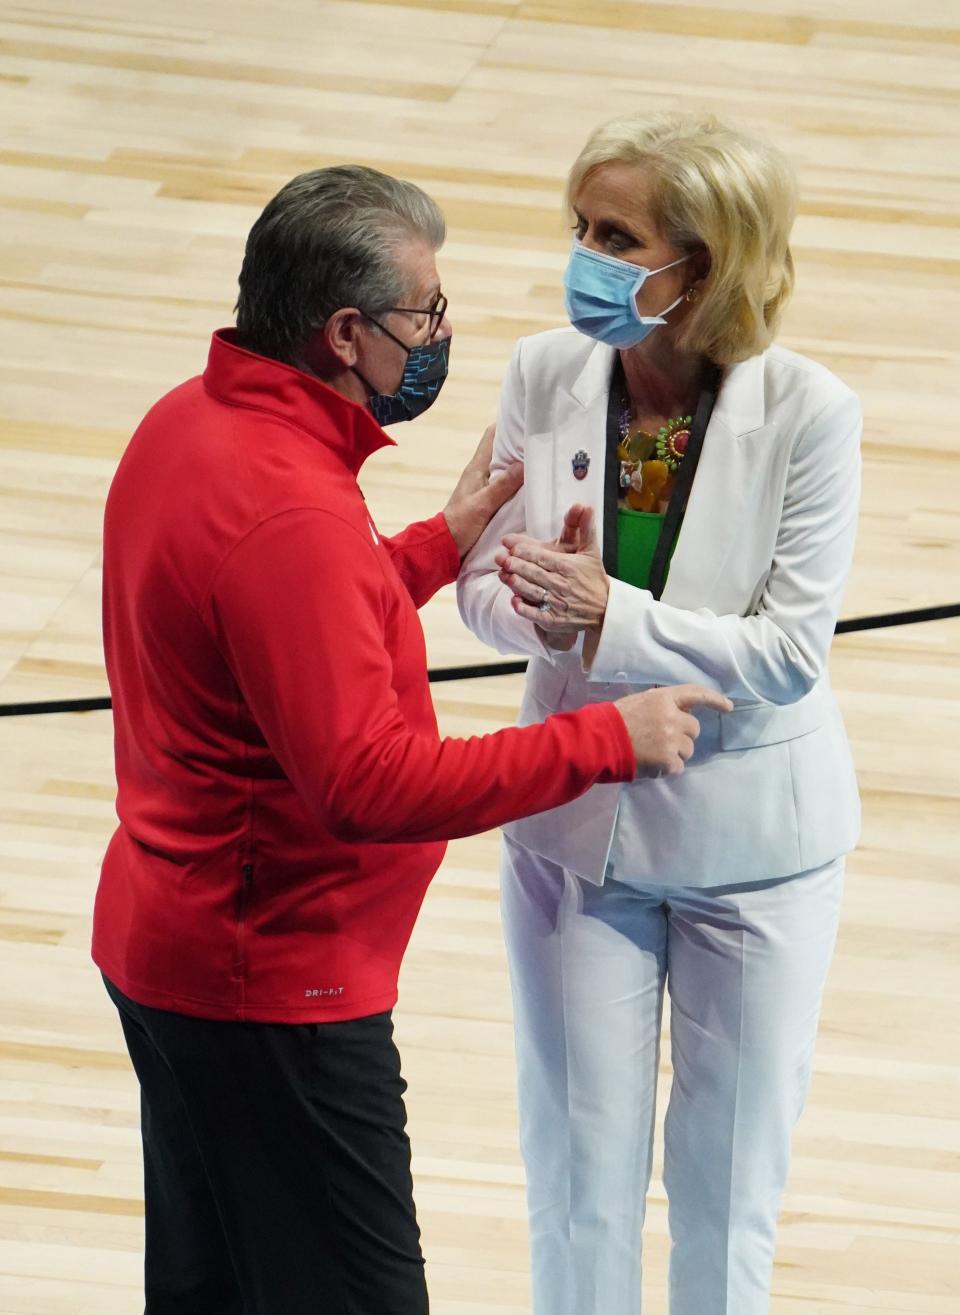 Connecticut coach Geno Auriemma chats with Baylor coach Kim Mulkey before their teams faced off in the Elite Eight on Monday.